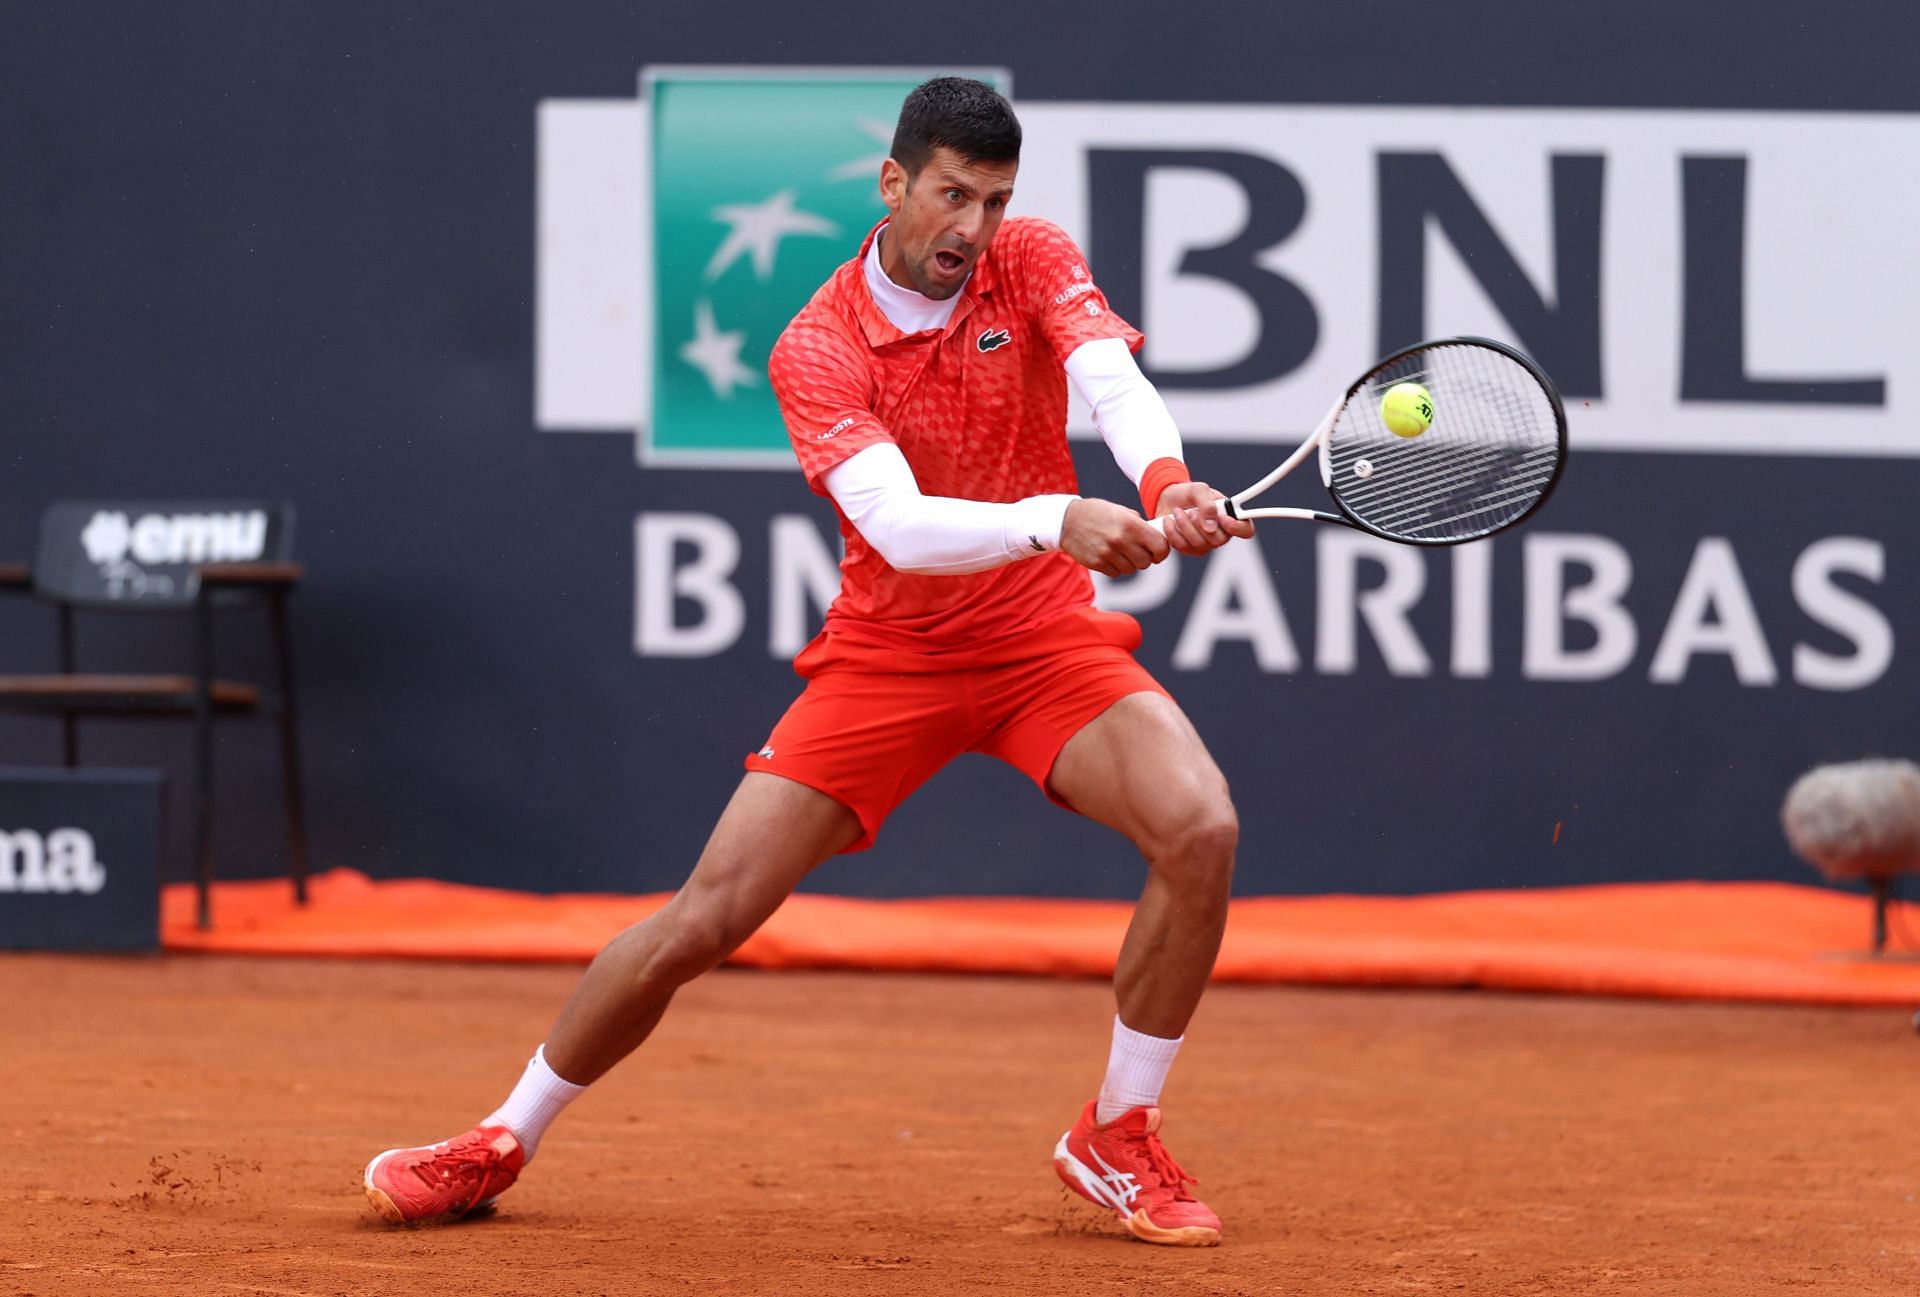 Djokovic crashed out in the last eight in Rome.